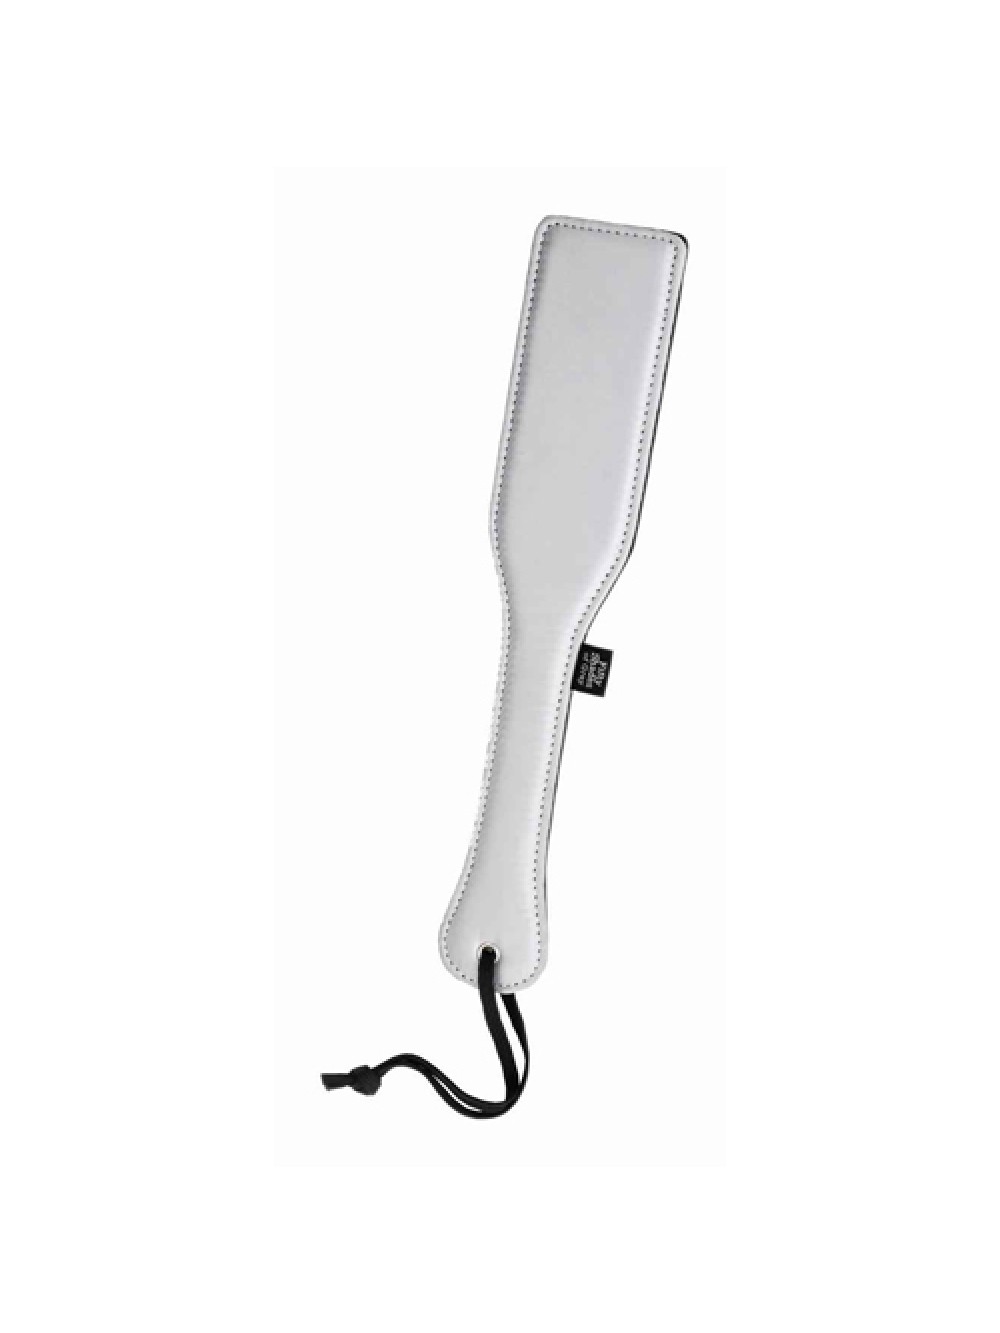 SCULACCIATORE TWITCHY PALM SATIN SPANKING PADDLE